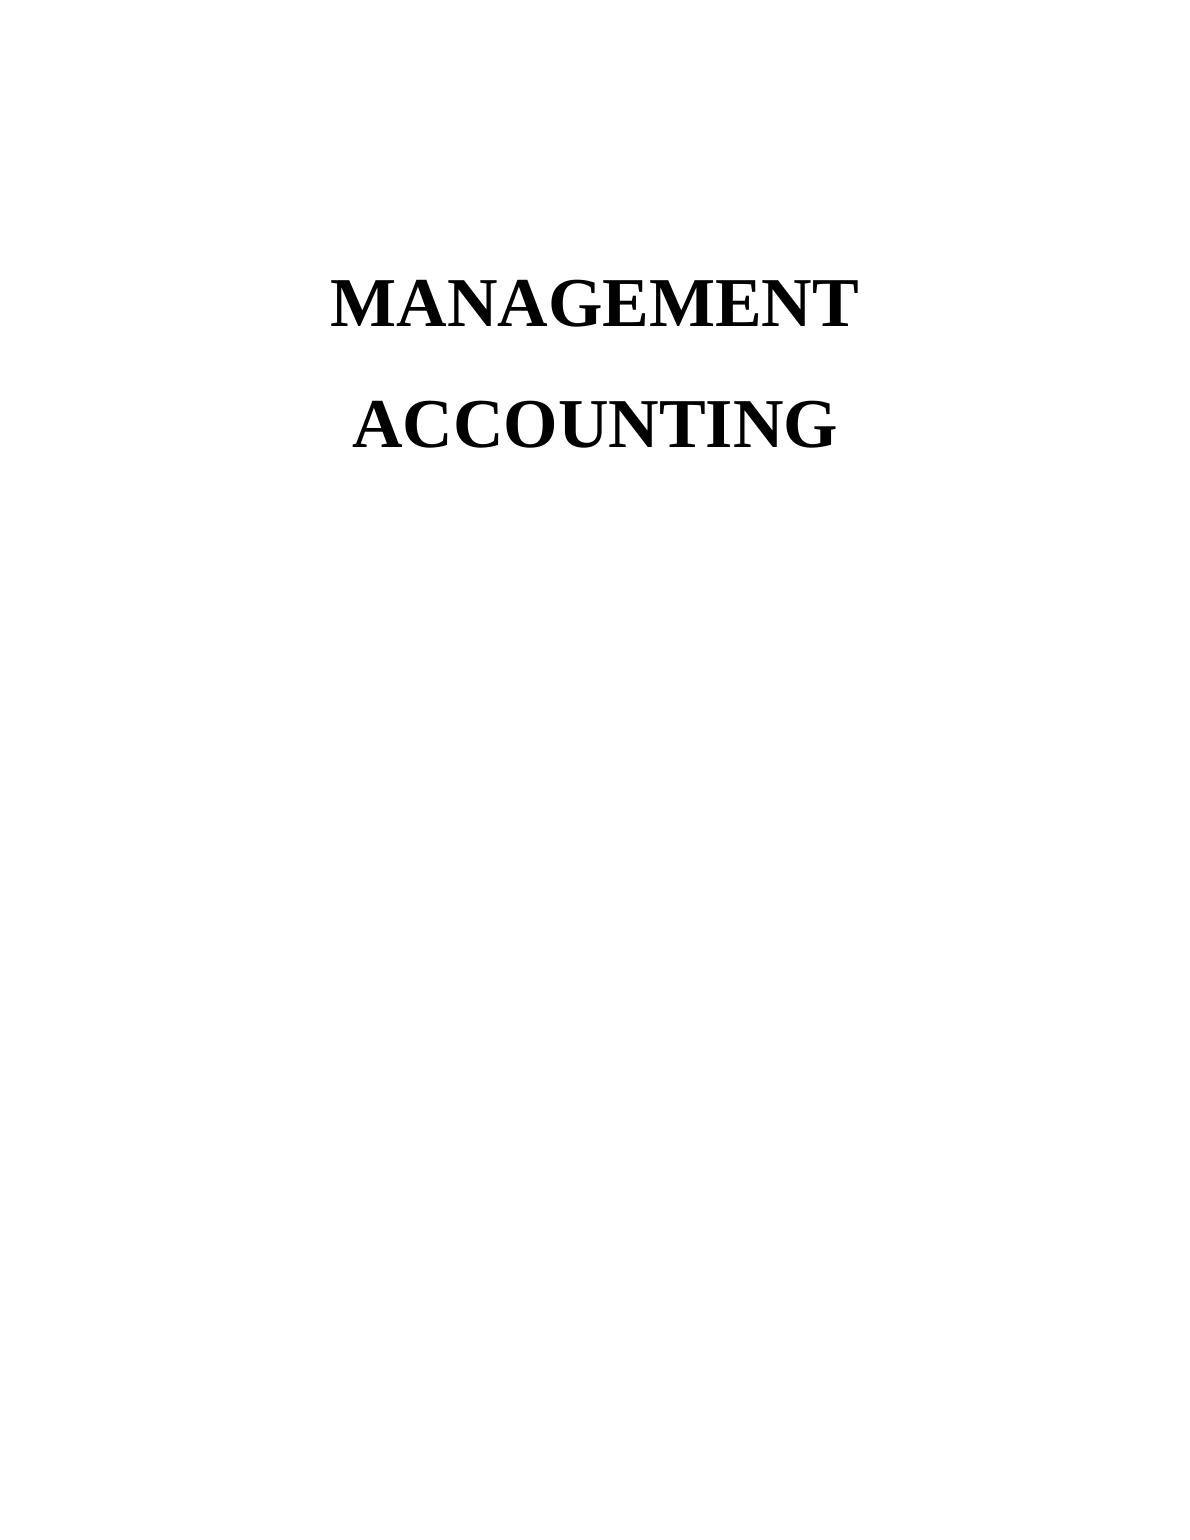 Management Accounting Assignment - TPG Processing_1